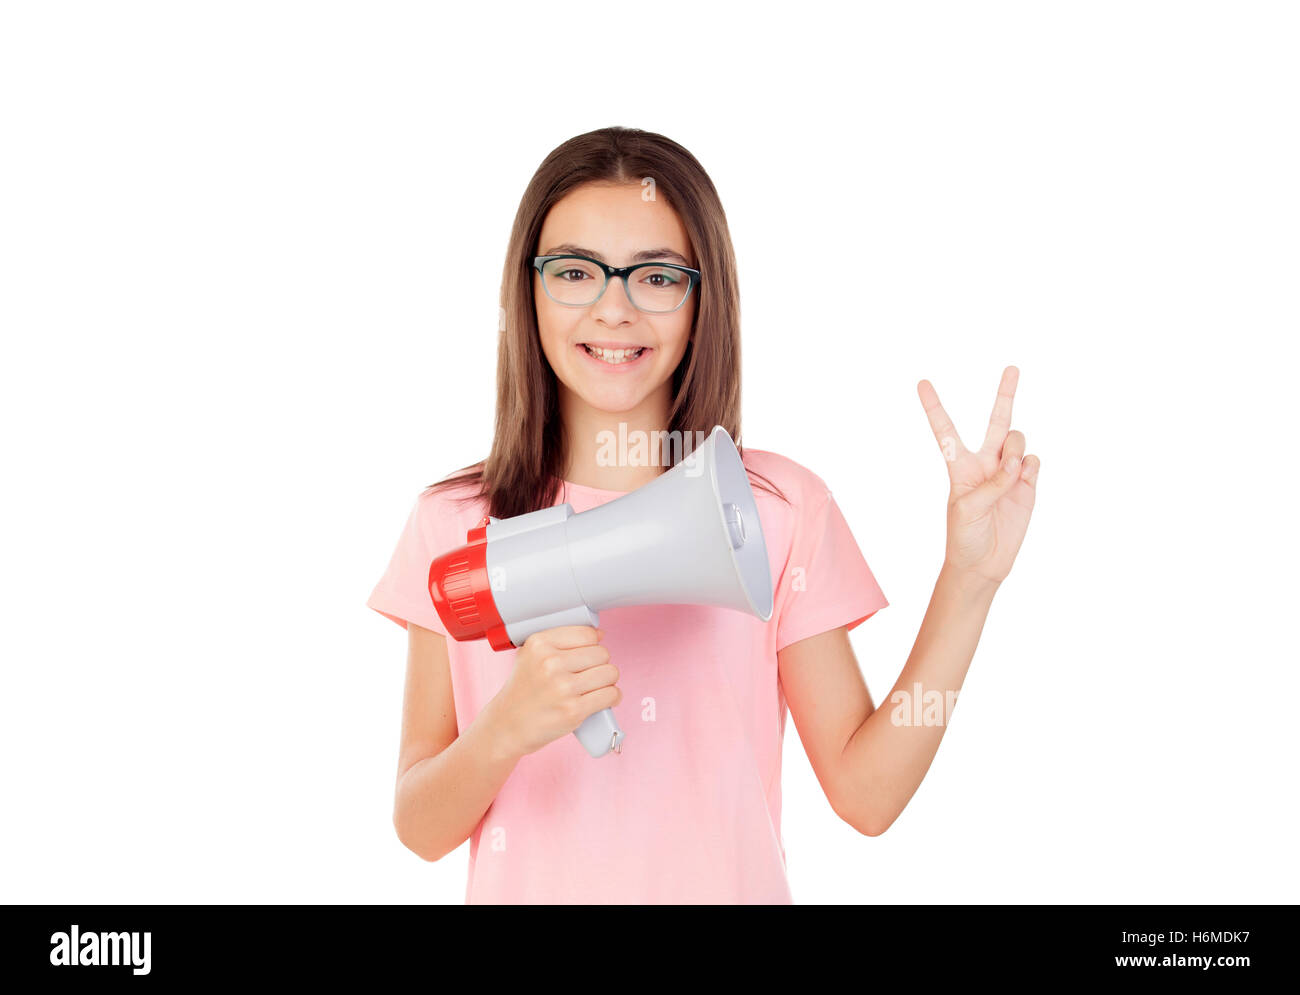 Pretty preteenager girl with a megaphone isolated on a white background Stock Photo